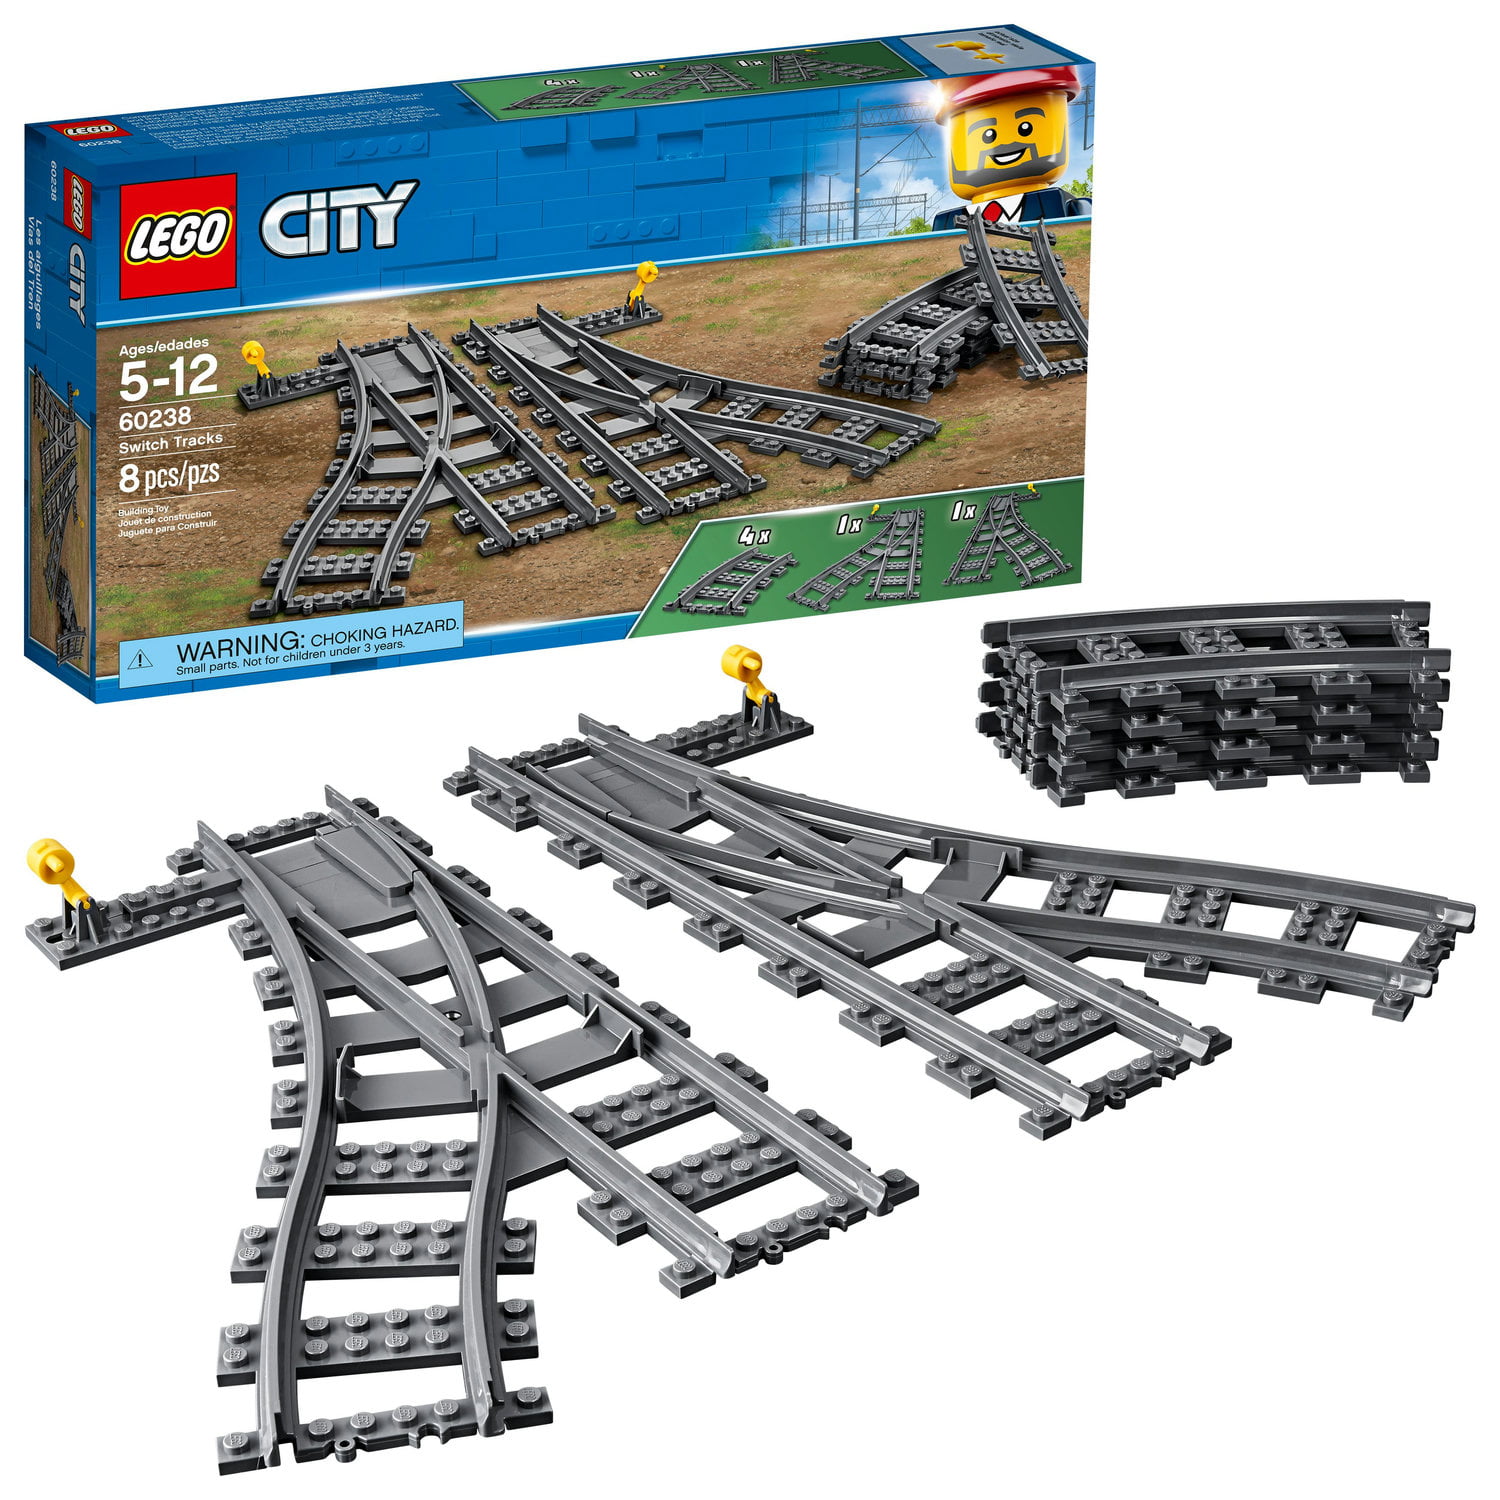 10 x Straight City Train Tracks Building block toy. Compatible with Lego 